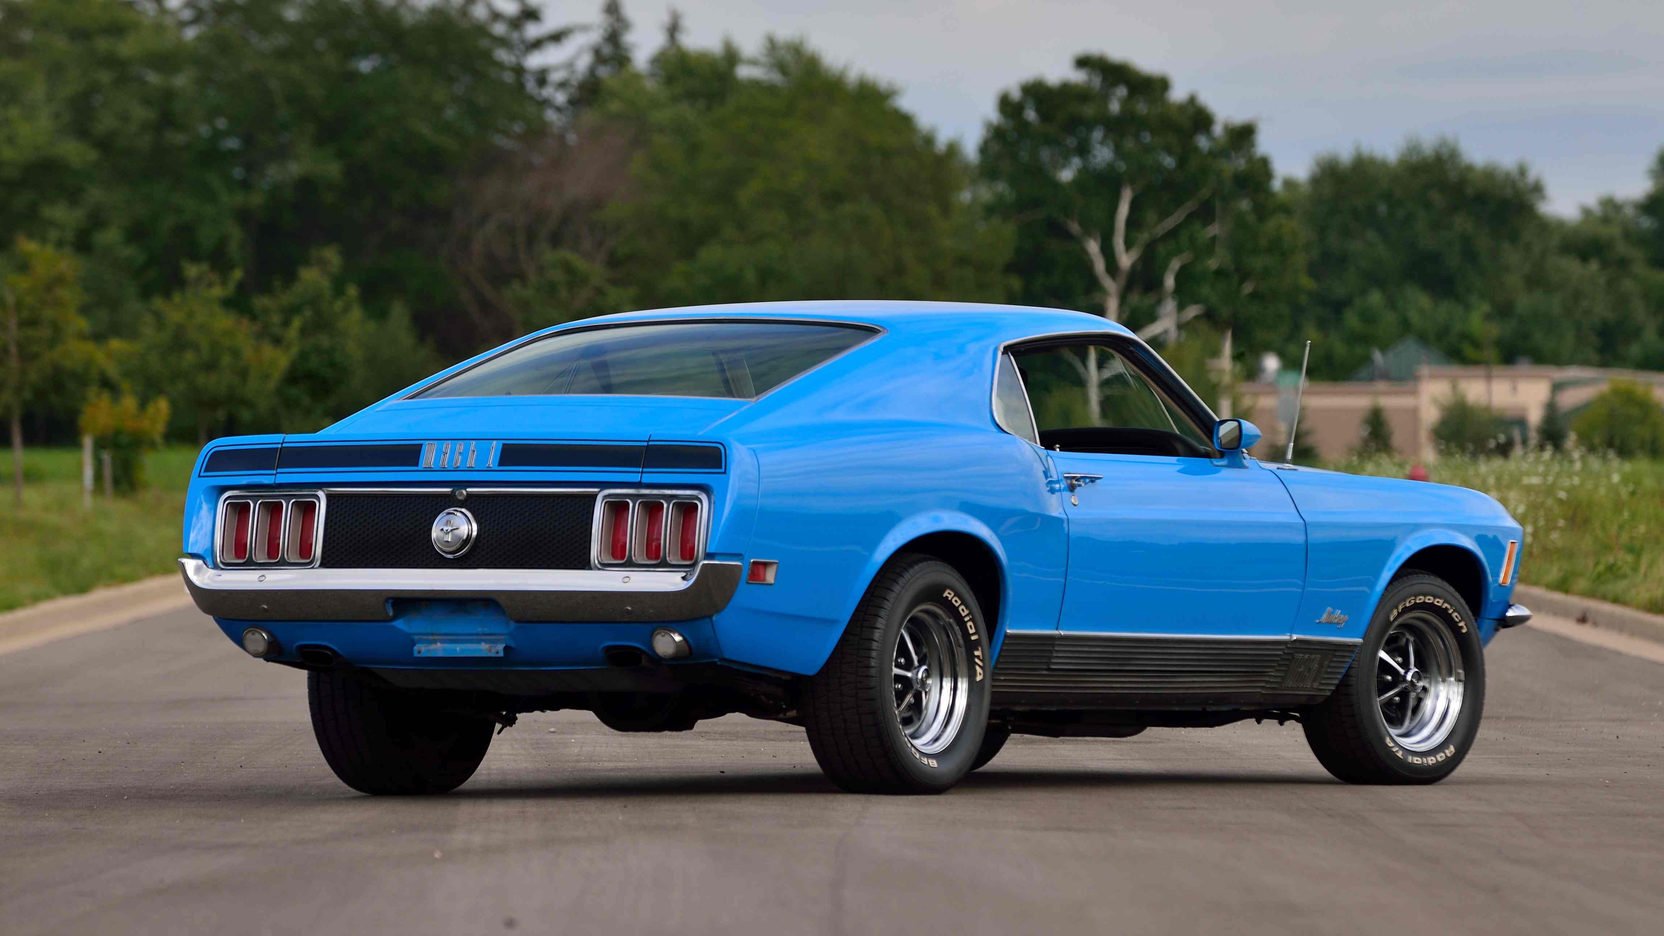 1970 Ford Fastback Mustang